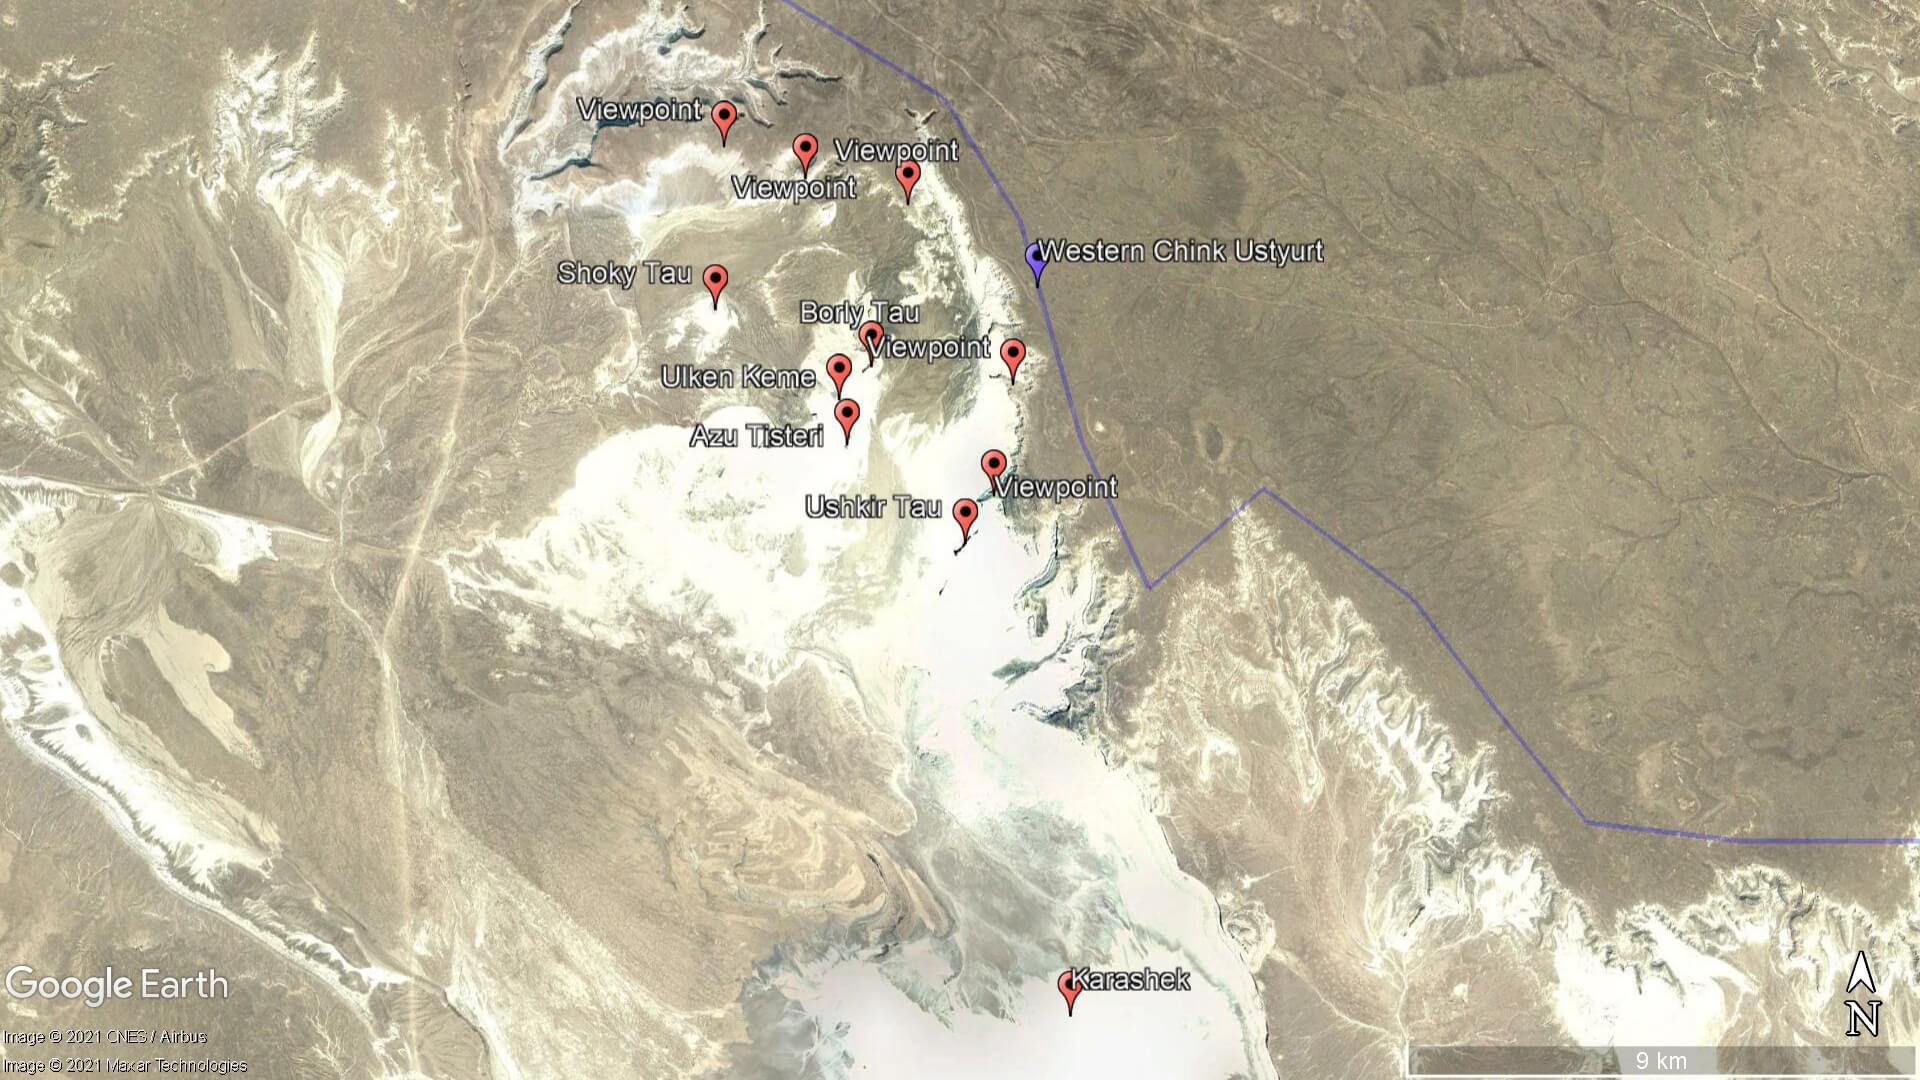 Satellite view of Boszhira, with locations of mountains and viewpoints.